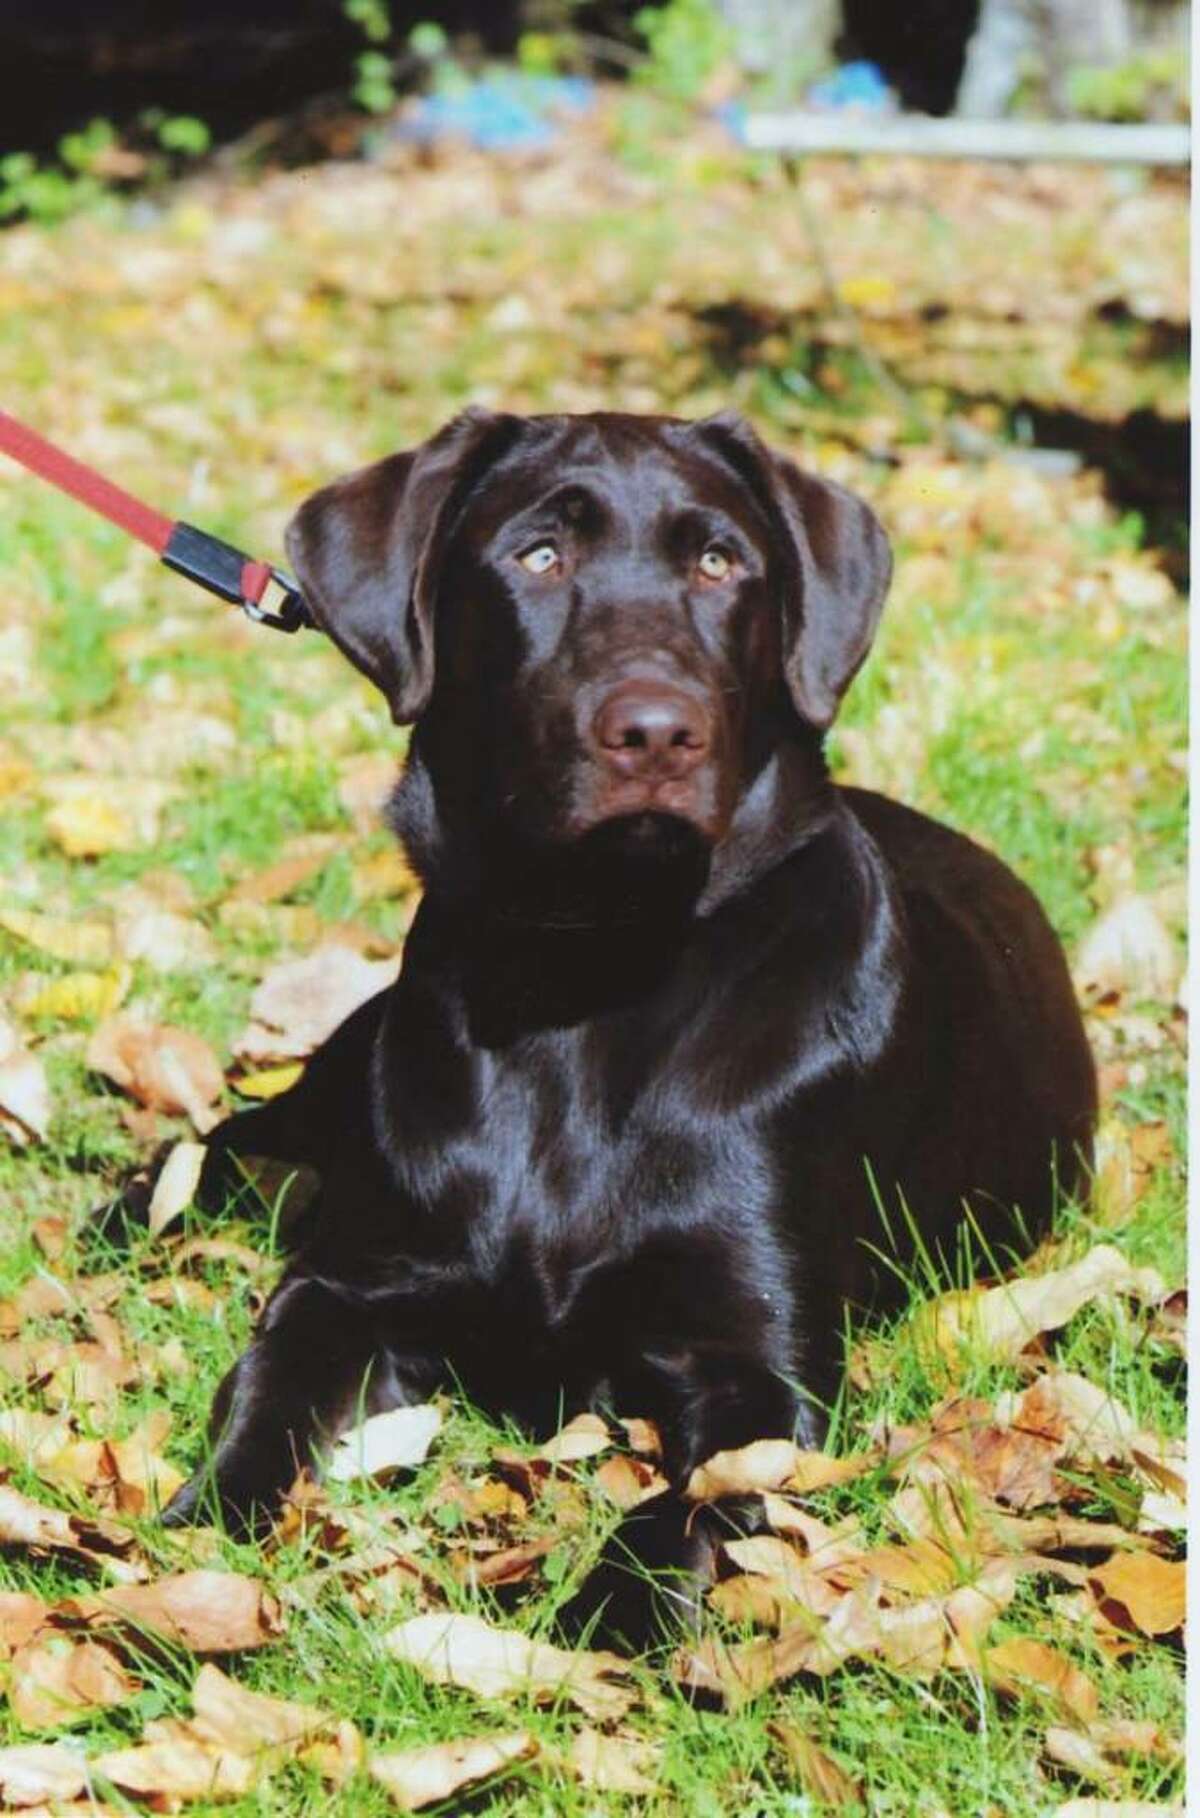 Toby is the dog park mascot contest winner. A two-year-old chocolate Labrador.